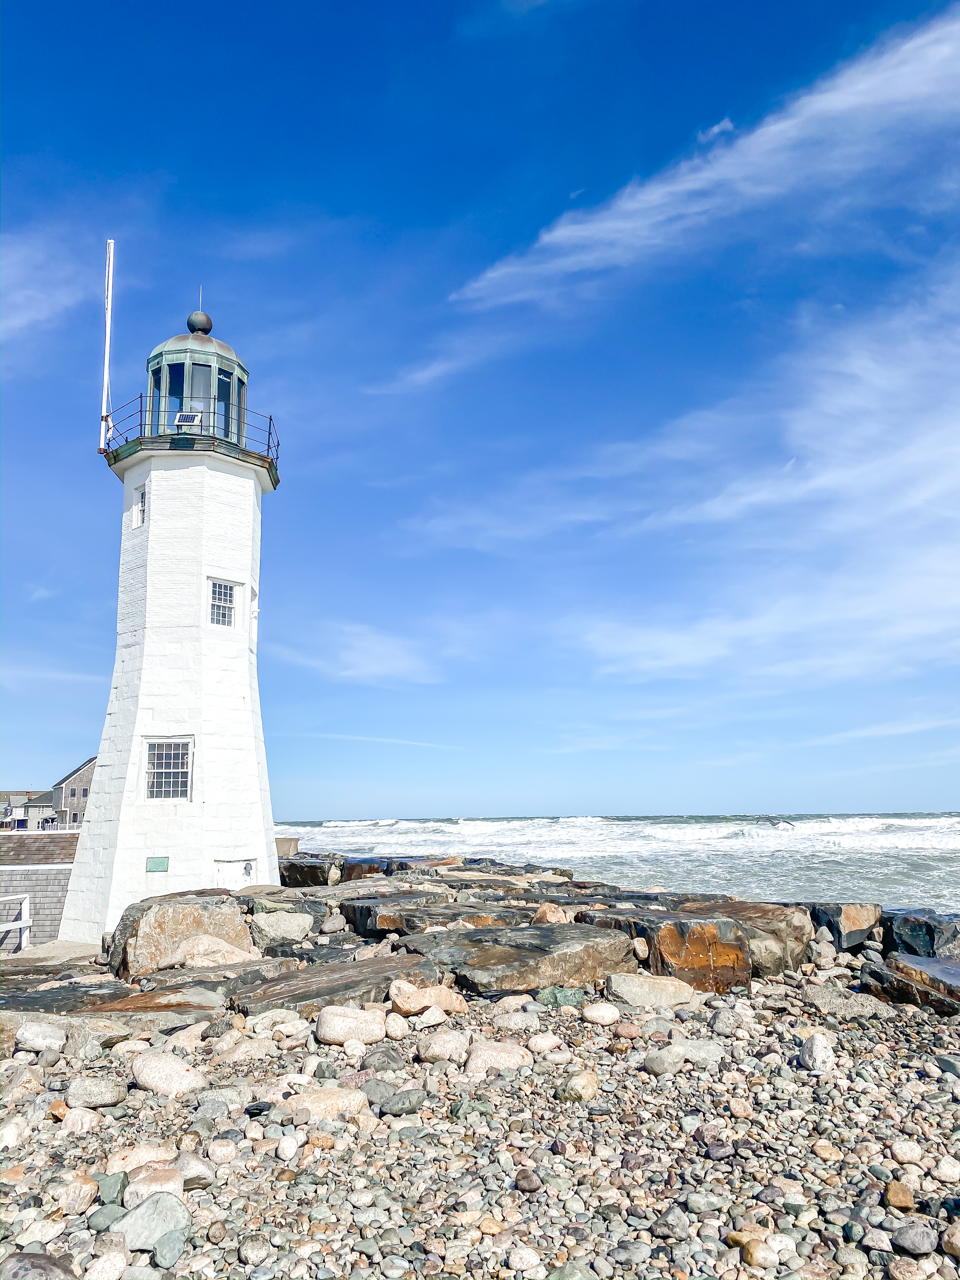 Instagram Hashtags for Followers by popular New England influencer, Shannon Shipman: image of a white lighthouse on a rocky shore. 